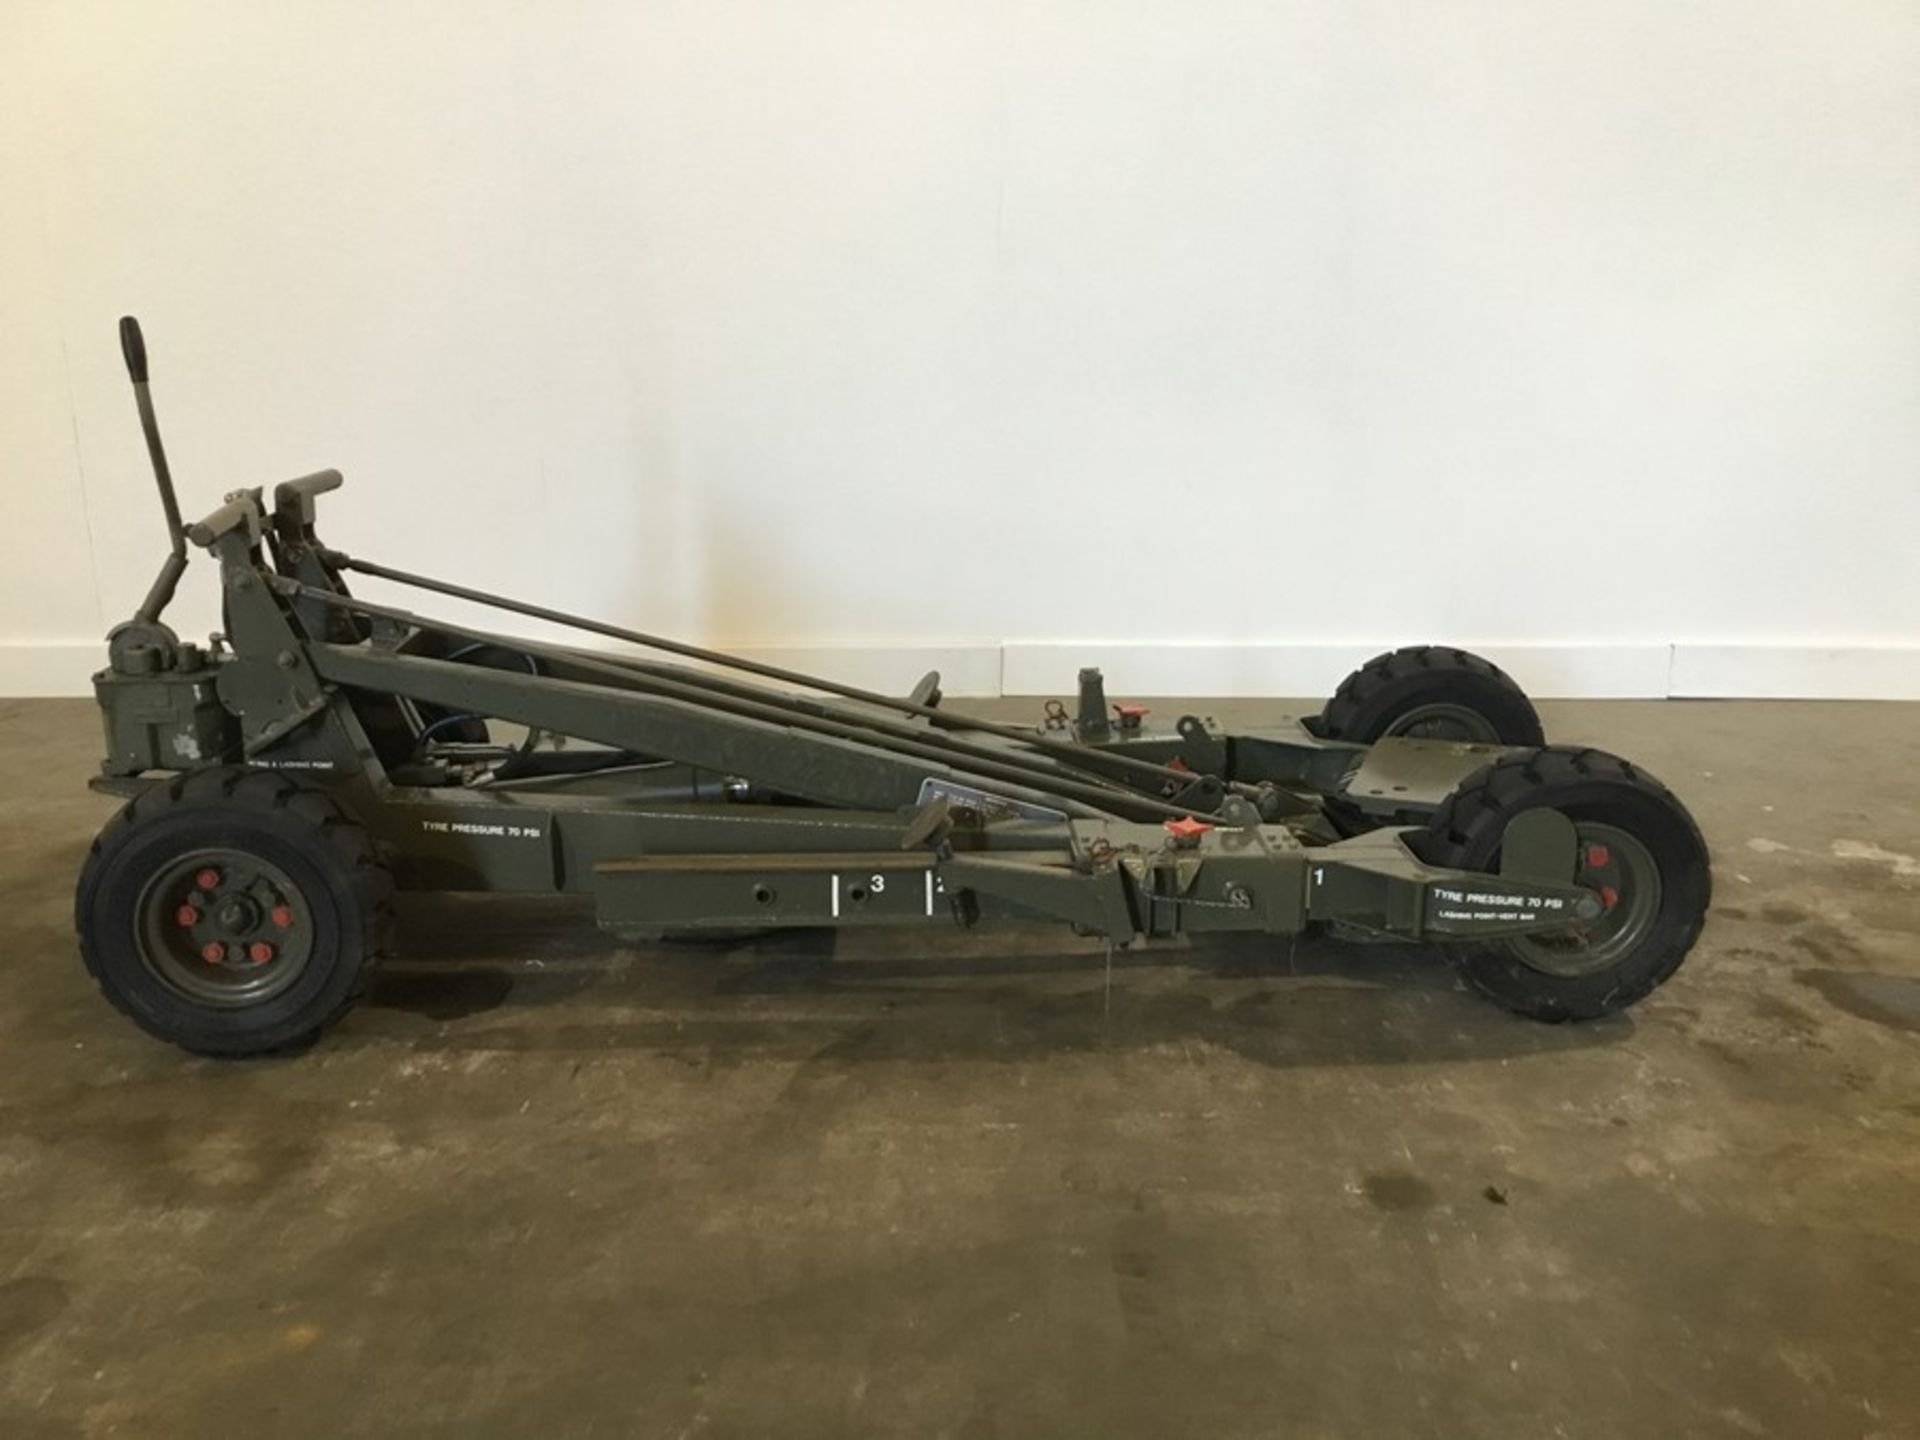 Portsmouth Aviation Type R Mk2 weapon loading trolley, SWL 1135Kg,Max lift height 2.2Metres - Image 6 of 15